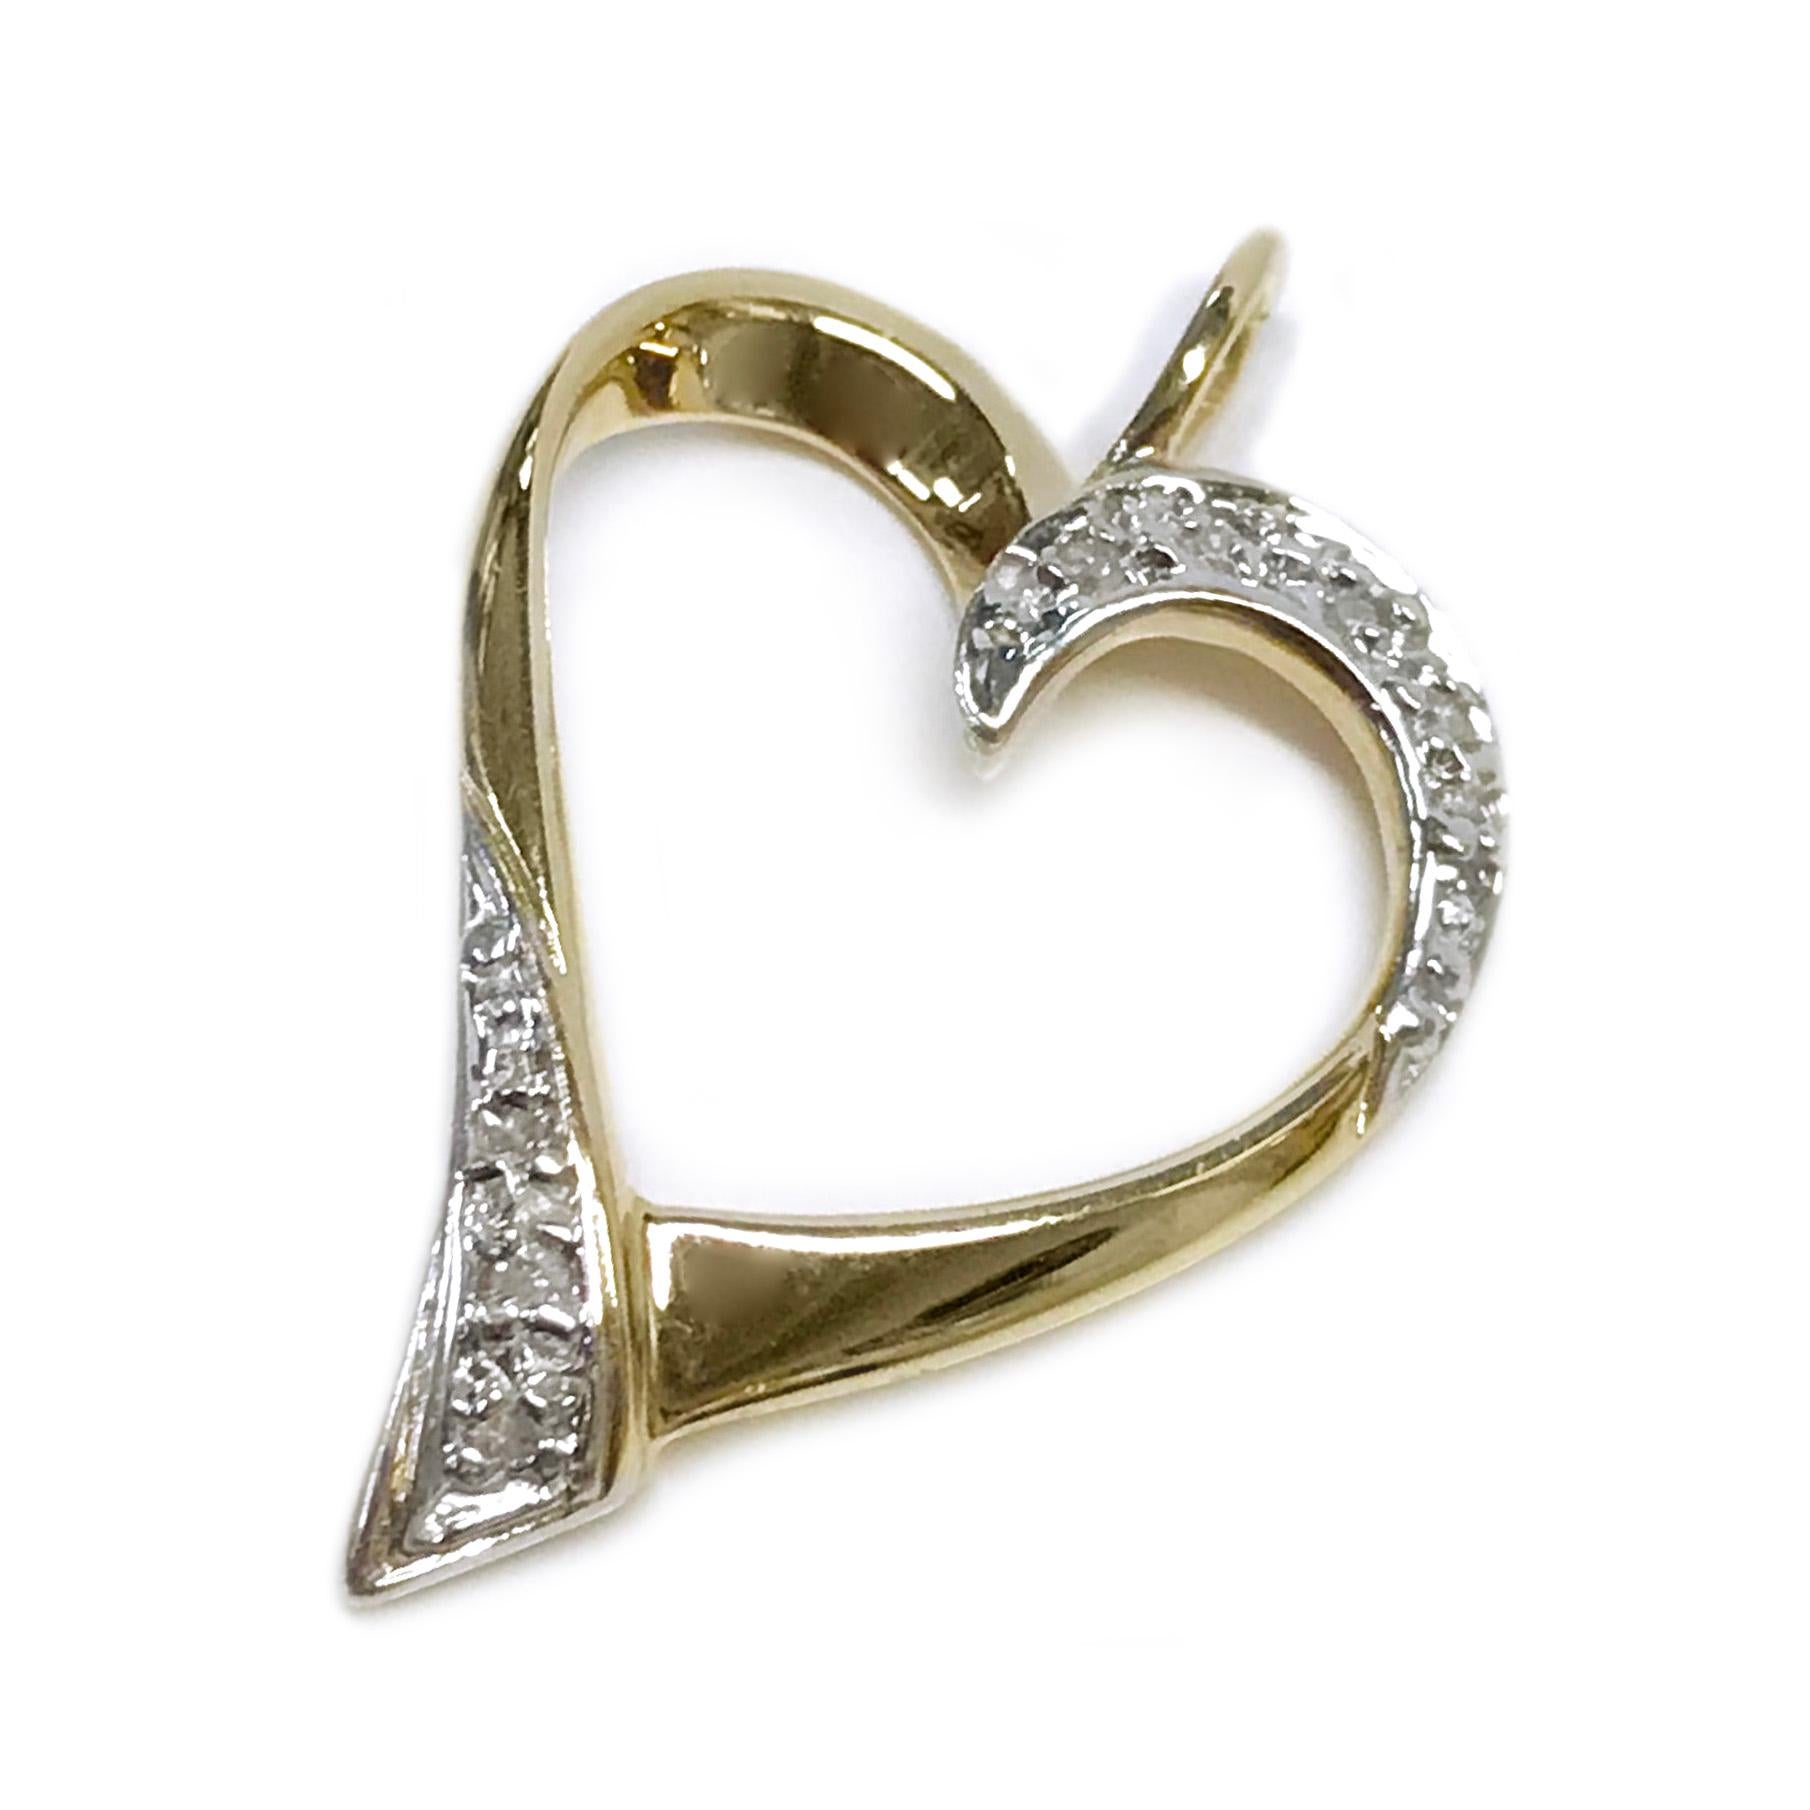 14 Karat Two-Tone White and Yellow Gold Diamond Heart Pendant. Four round diamonds are bead set in white gold on the top curve of one side and four on the opposite lower side of the pendant. The eight diamonds measure 1.2mm and have a total carat